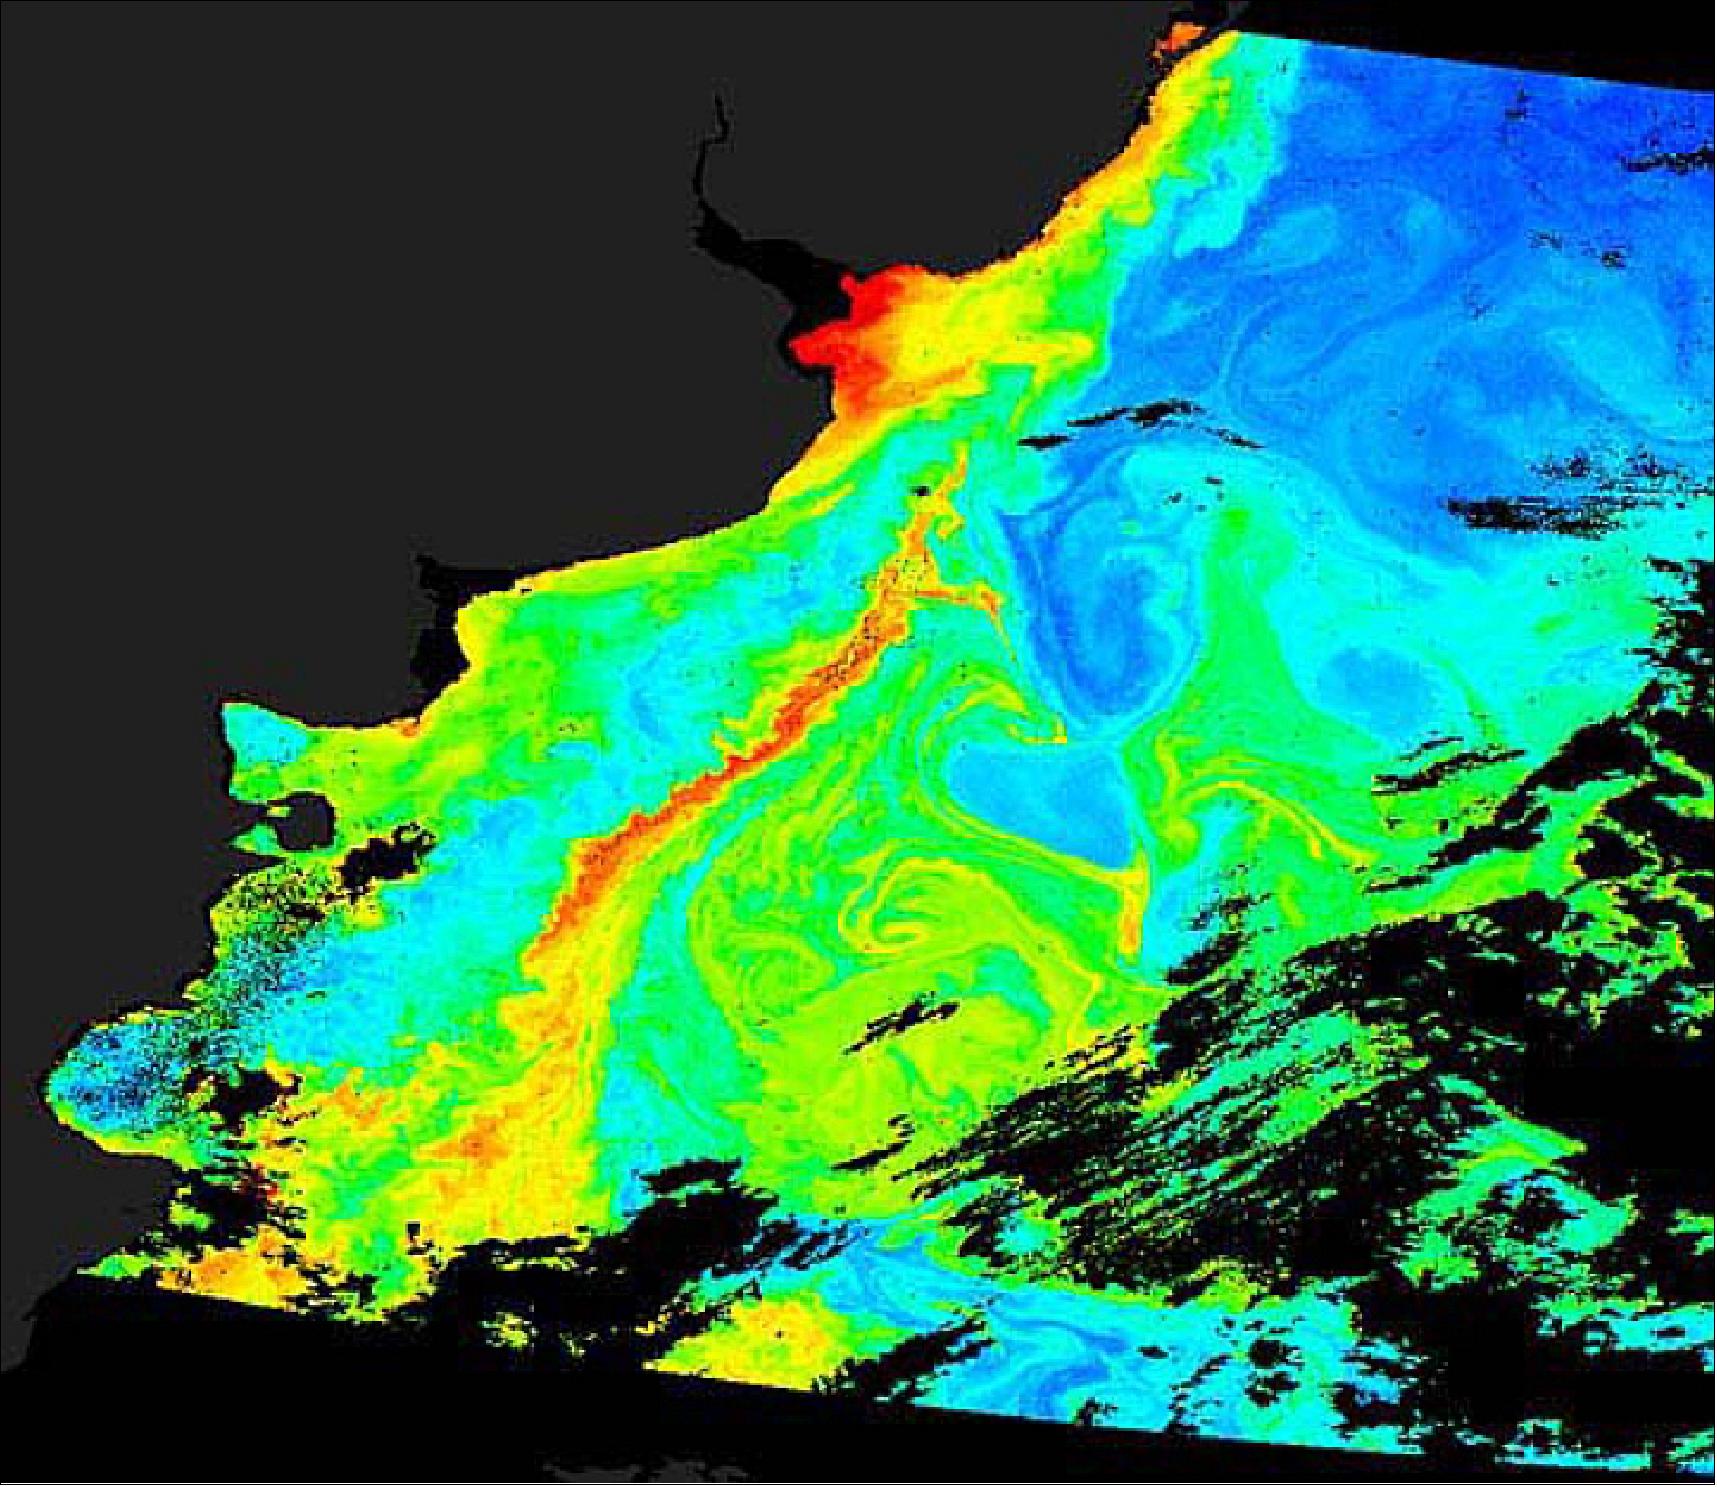 Figure 35: This map shows chlorophyll in the same area in 1999 as observed by the SeaWiFS (Sea-viewing Wide Field-of-view Sensor). Chlorophyll concentrations are shown on a rainbow palette, with yellows and reds representing the highest concentrations. The map was the first item ever published on NASA Earth Observatory (image credit: Image processed by Robert Simmon based on data from the SeaWiFS project and the Goddard DAAC. Text by Jim Acker)